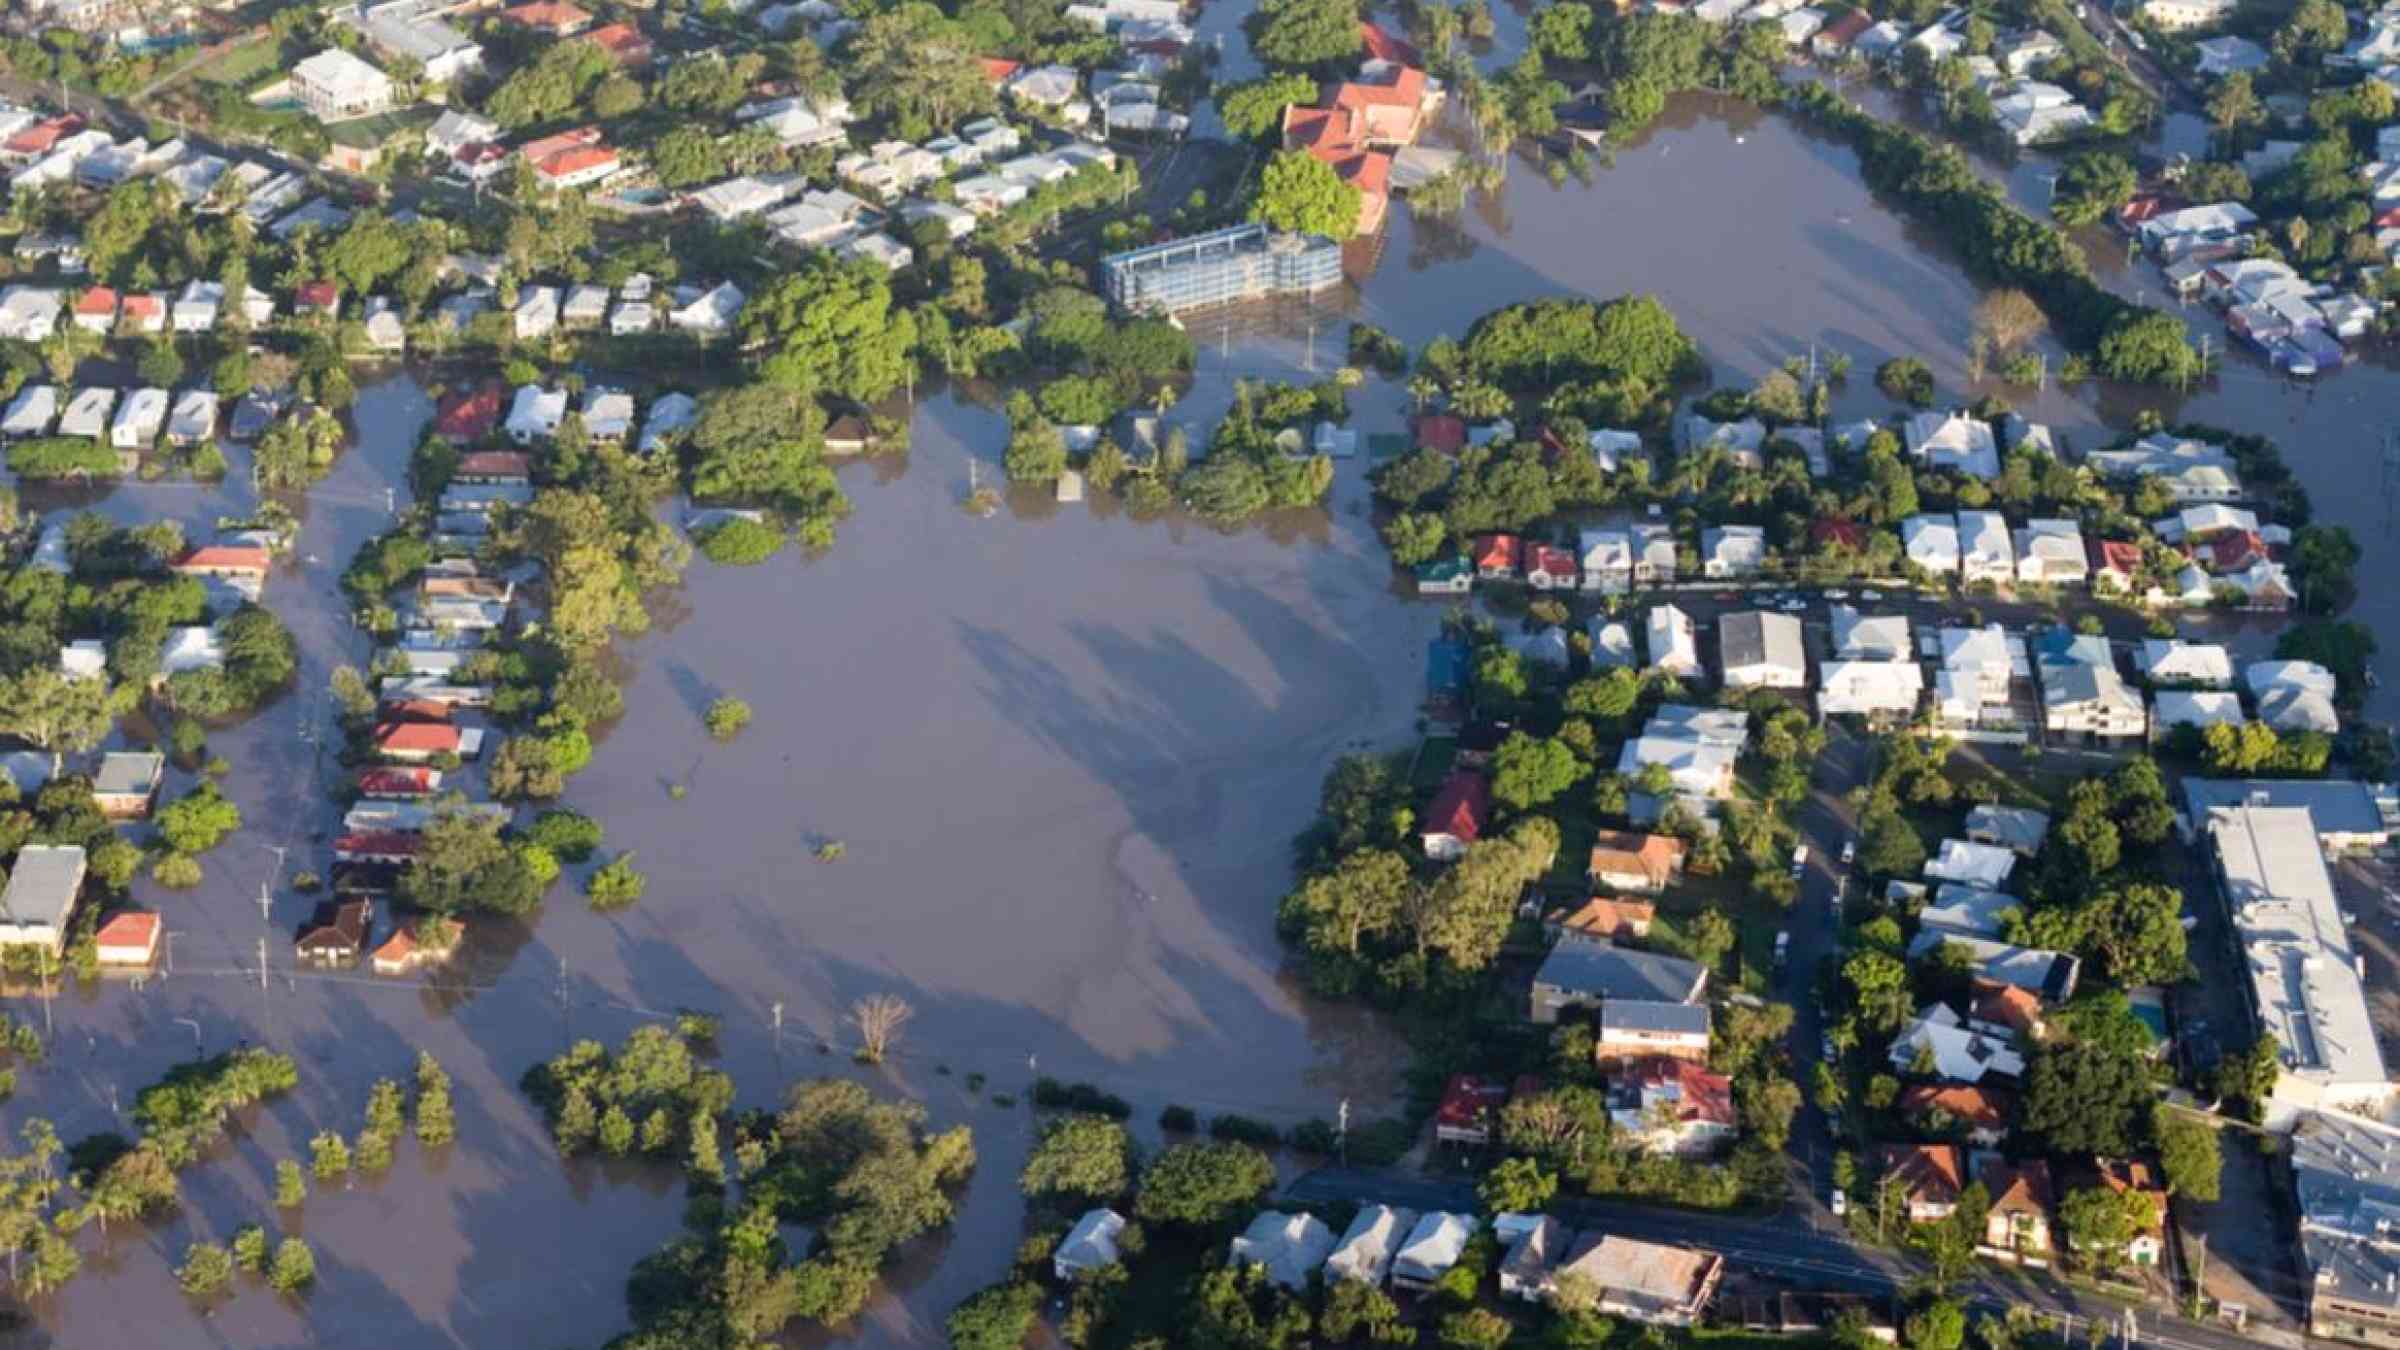 The impact of the flooding of the Brisbane River in 2011, Australia. Brisbane/Shutterstock